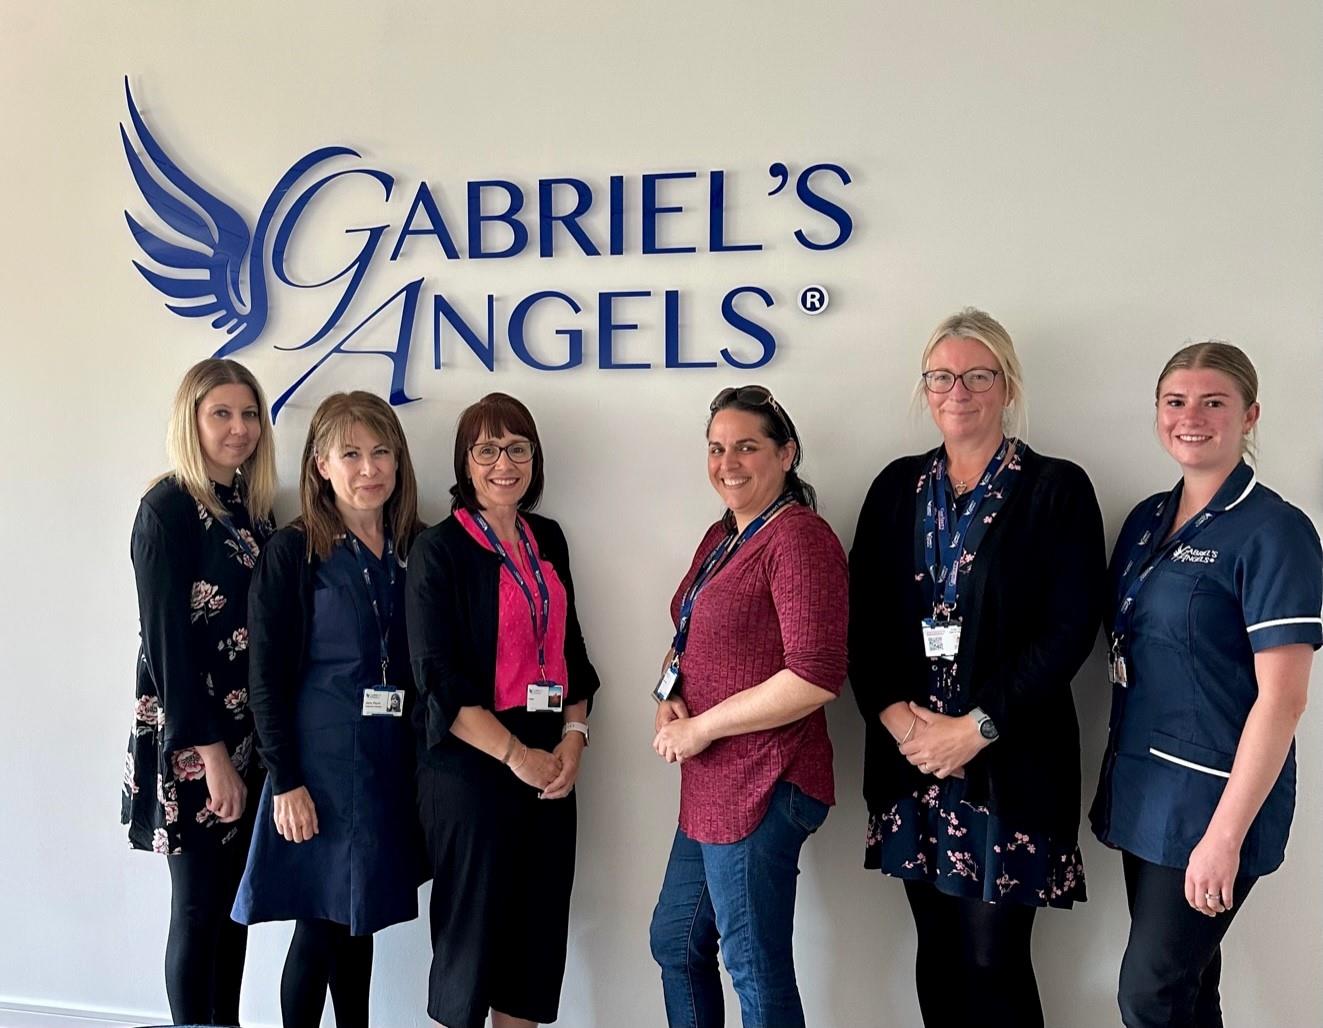 Skills for Care Utilise Gabriel’s Angels Meeting Facility